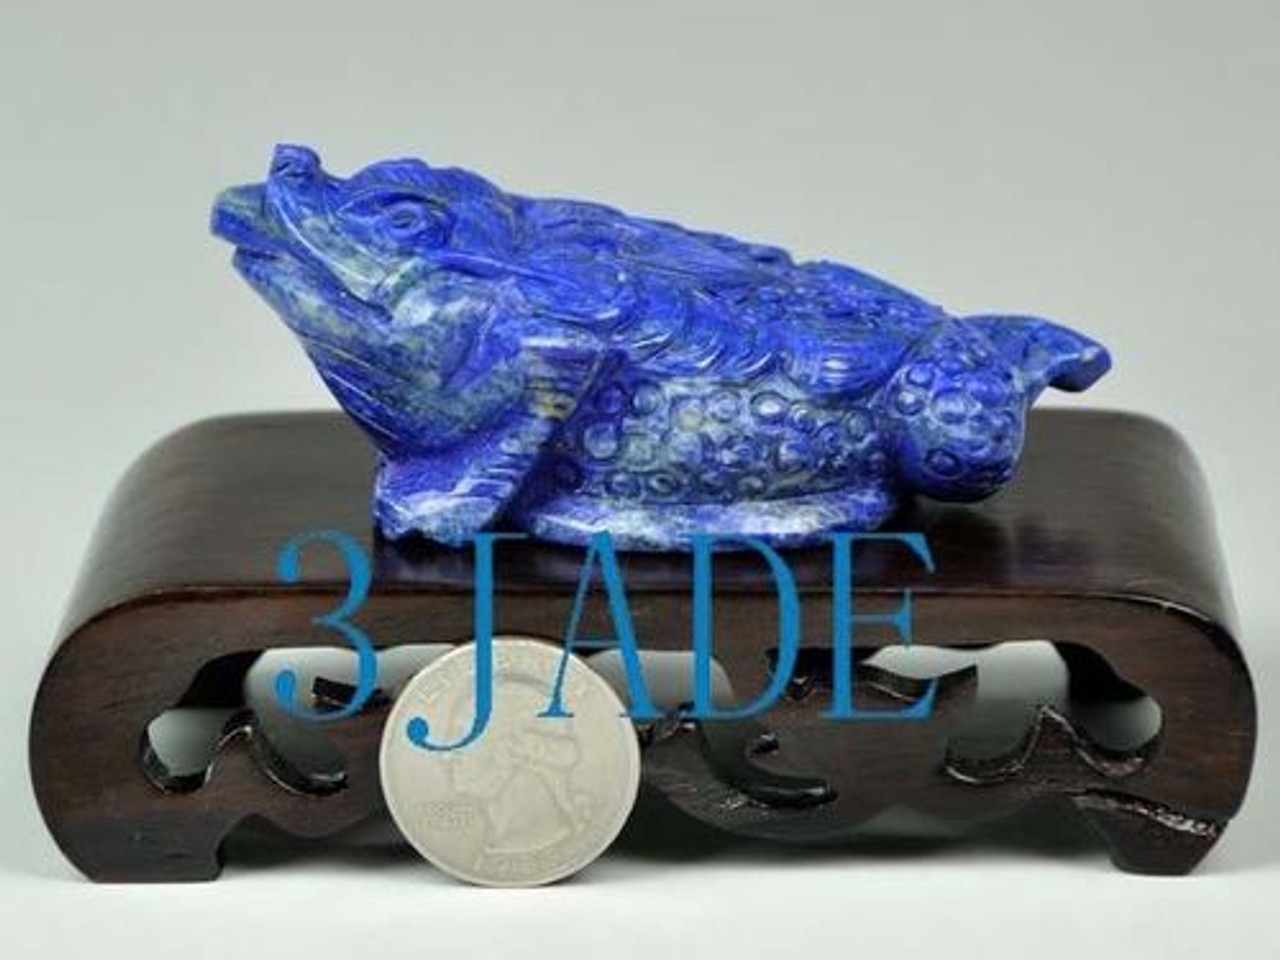 Hand Carved Natural Lapis Lazuli Gemstone Carving: Toad Statue / Sculpture Art